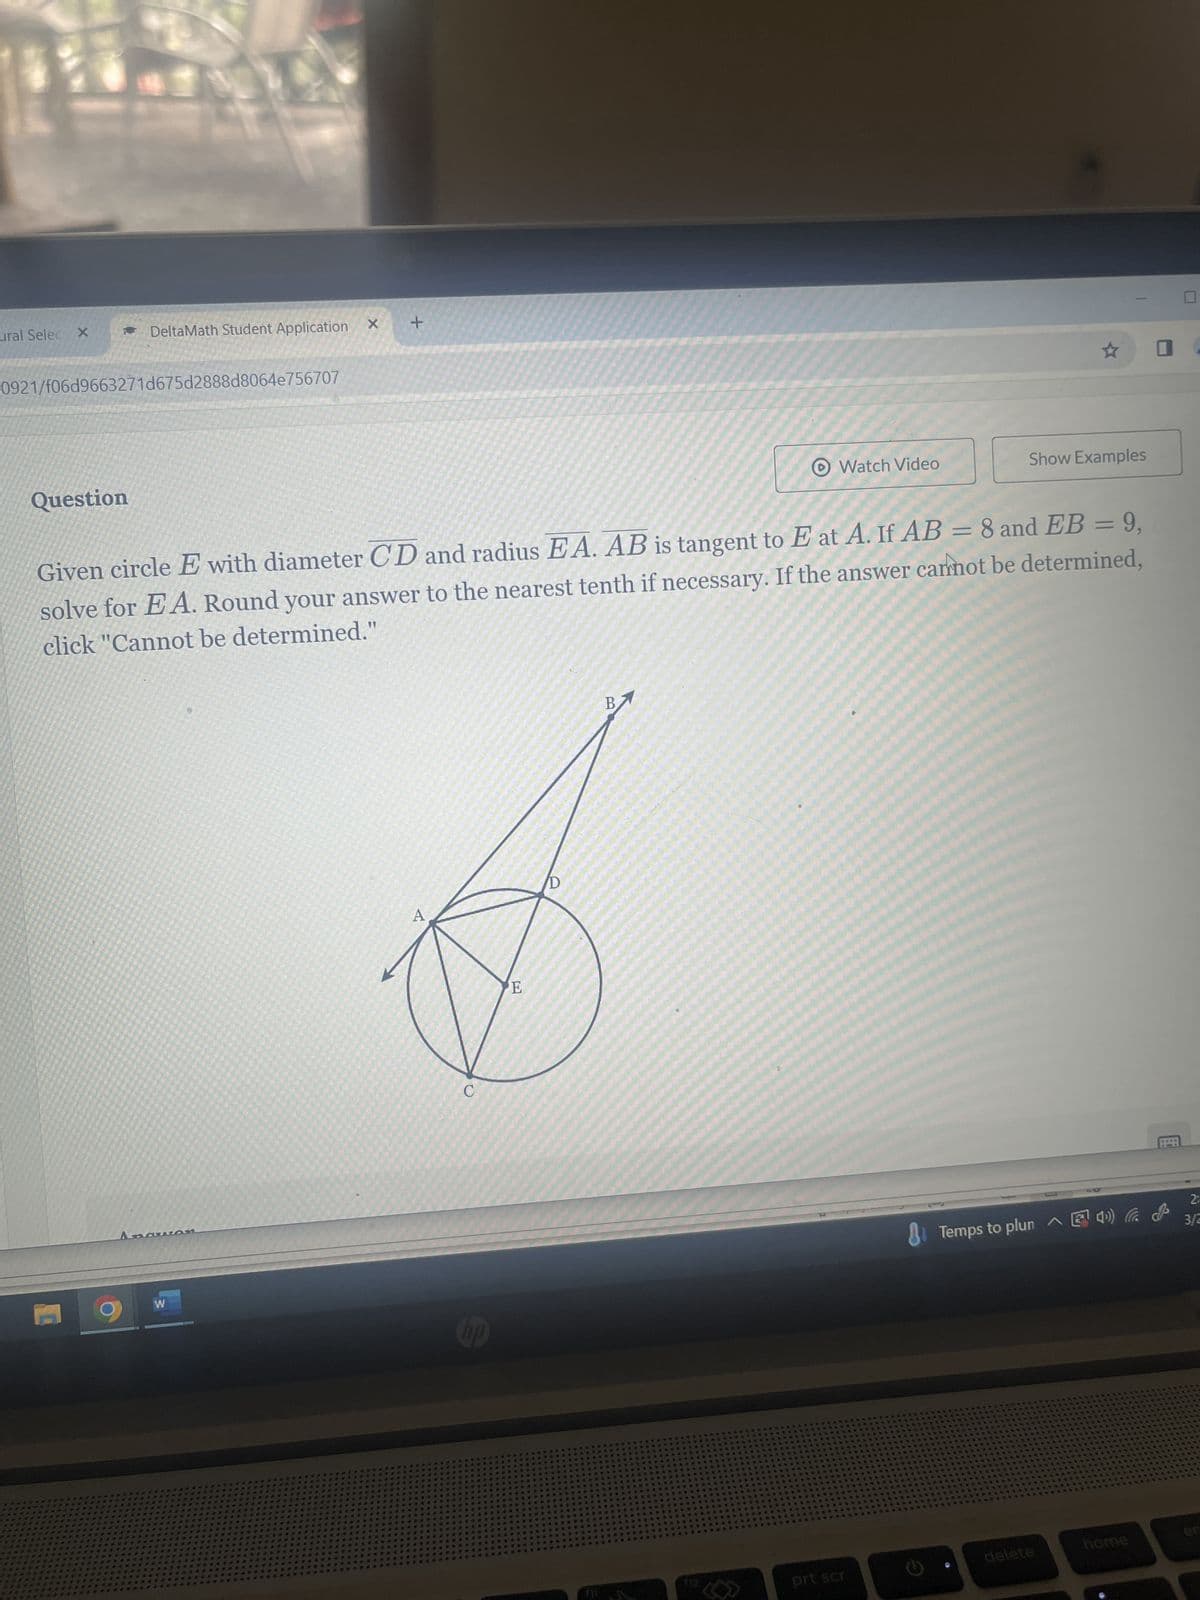 ural Selec X
DeltaMath Student Application
0921/f06d9663271d675d2888d8064e756707
+
Question
Watch Video
Show Examples
Given circle E with diameter CD and radius EA. AB is tangent to E at A. If AB = 8 and EB = 9,
solve for EA. Round your answer to the nearest tenth if necessary. If the answer cannot be determined,
click "Cannot be determined."
W
A
C
E
B
112
2:
Temps to plun 4) la & 3/2
prt scr
delete
home